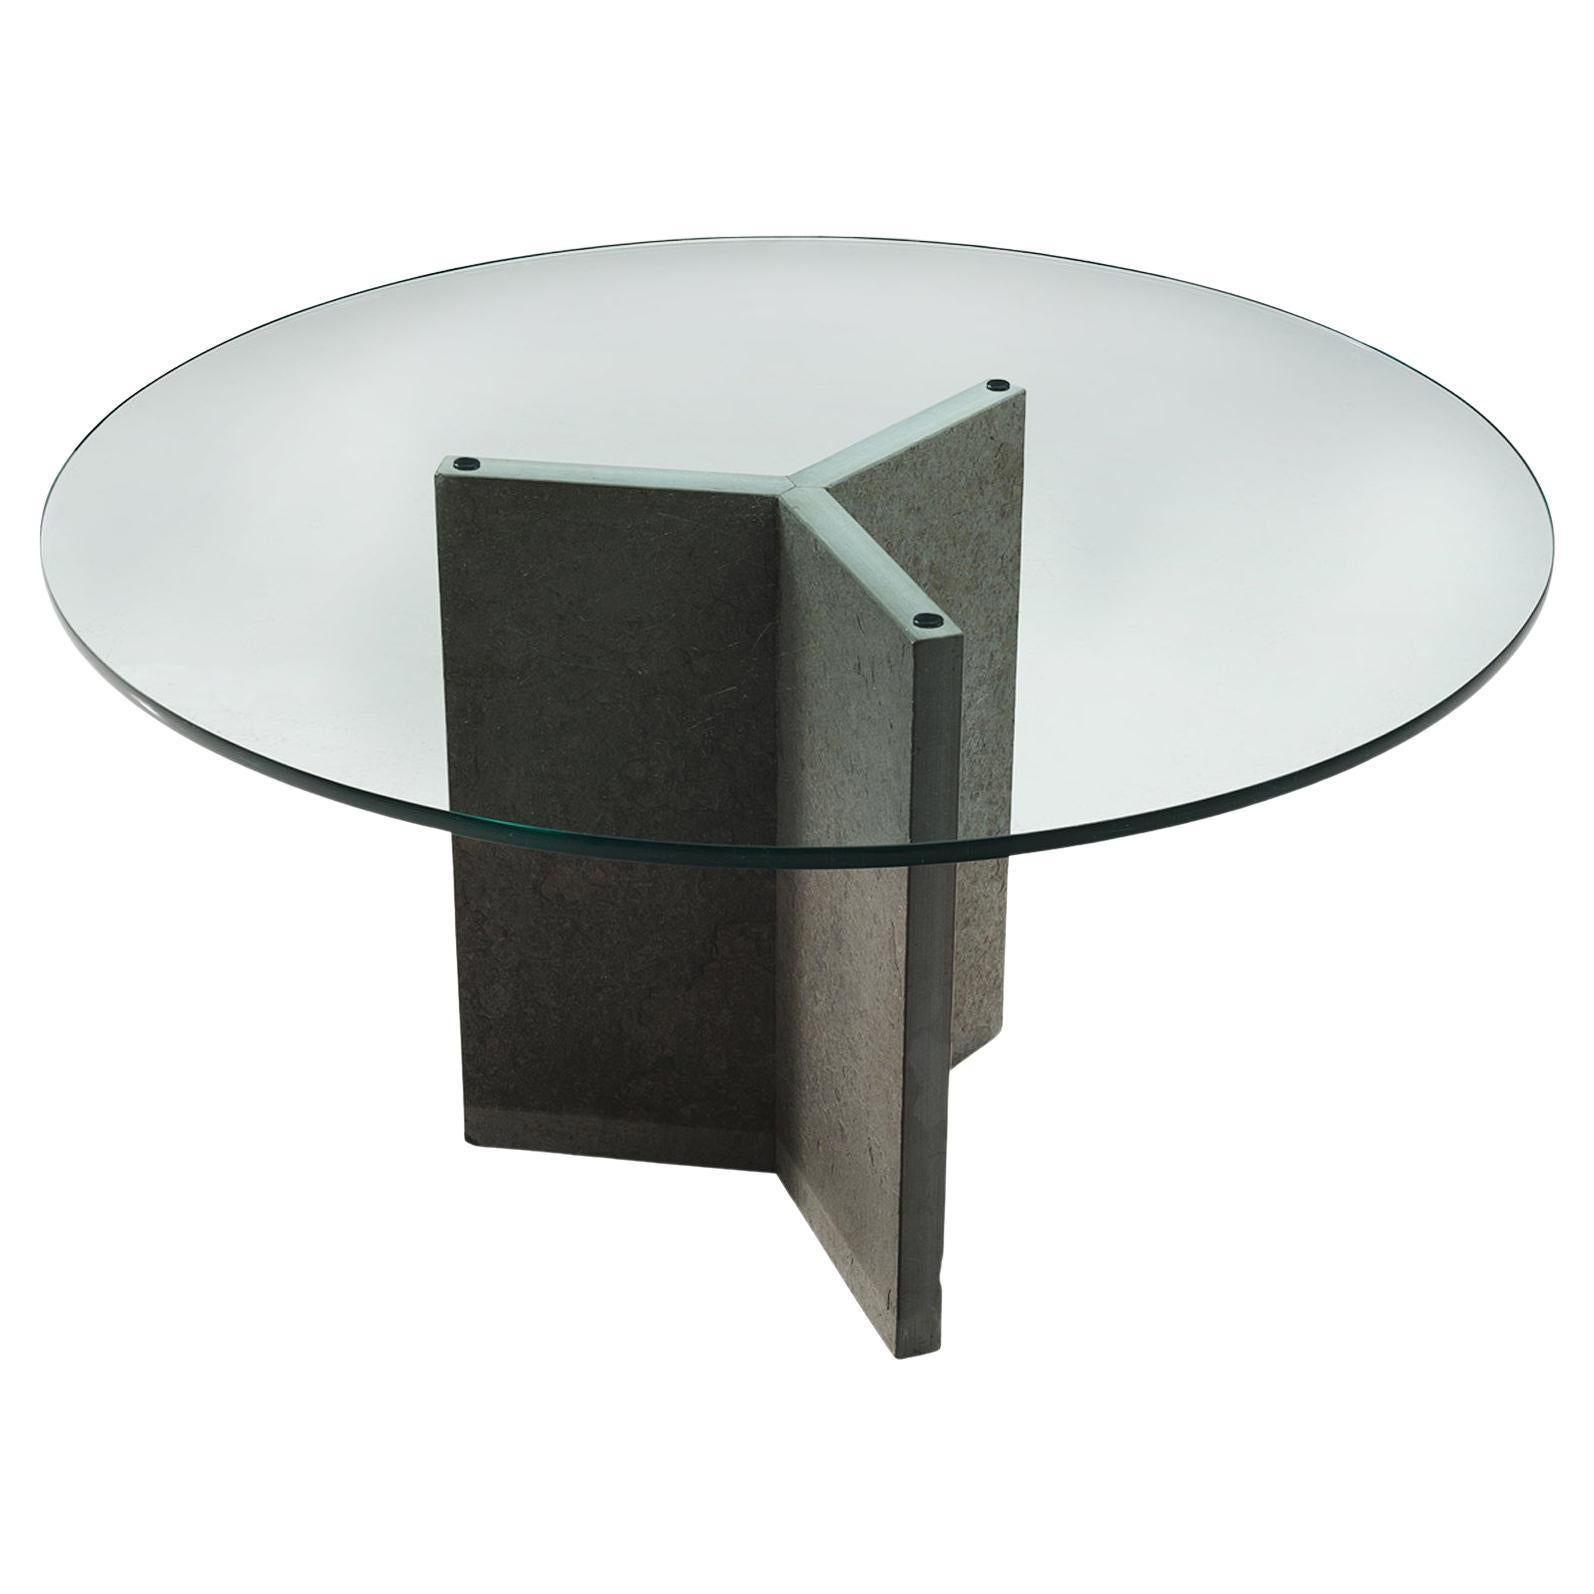 Architectural Italian Dining Table with Stone and Glass For Sale